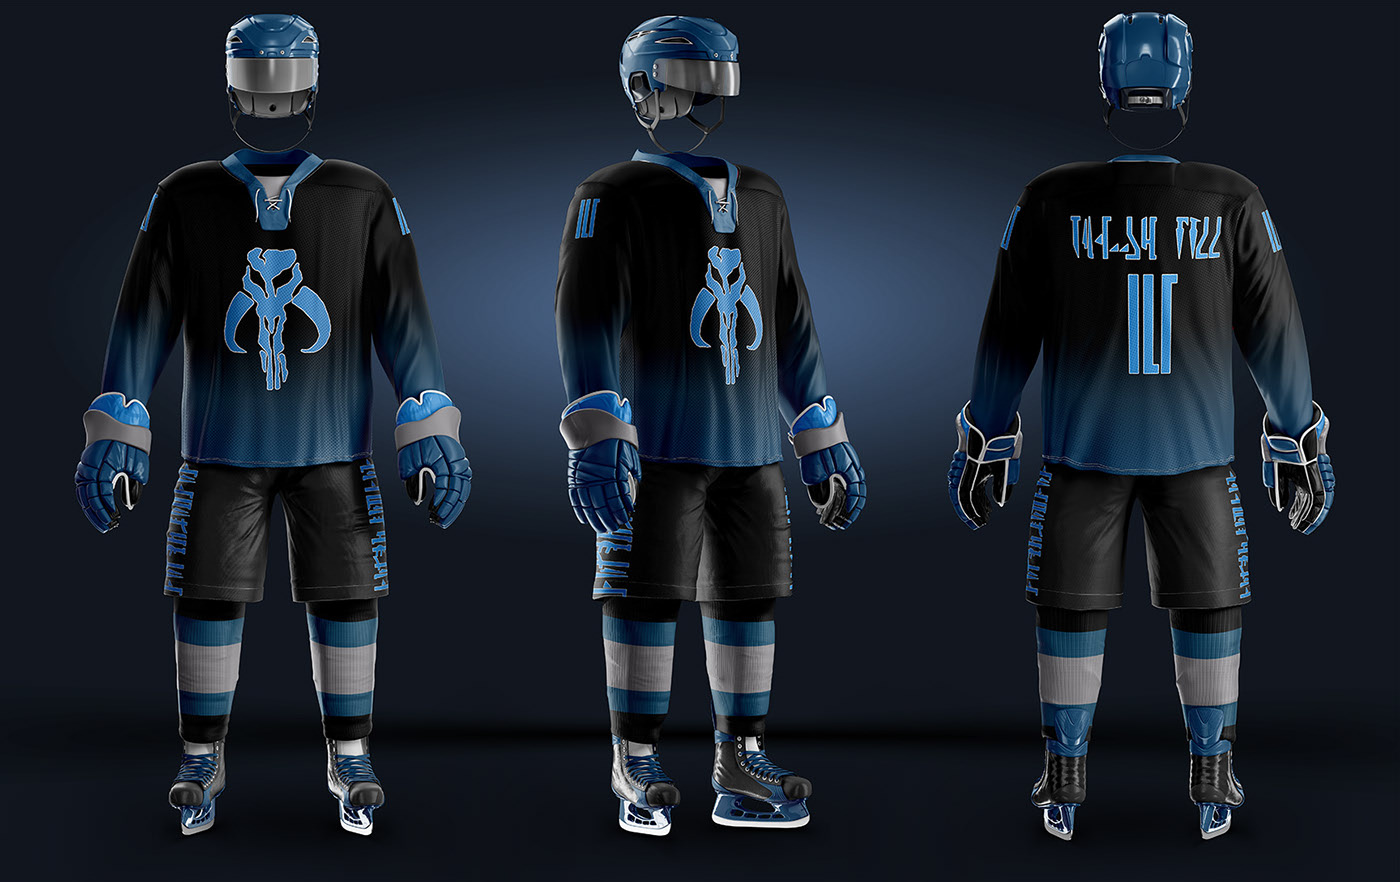 Duotone jersey concept for the Boston Bruins of the NHL. I used